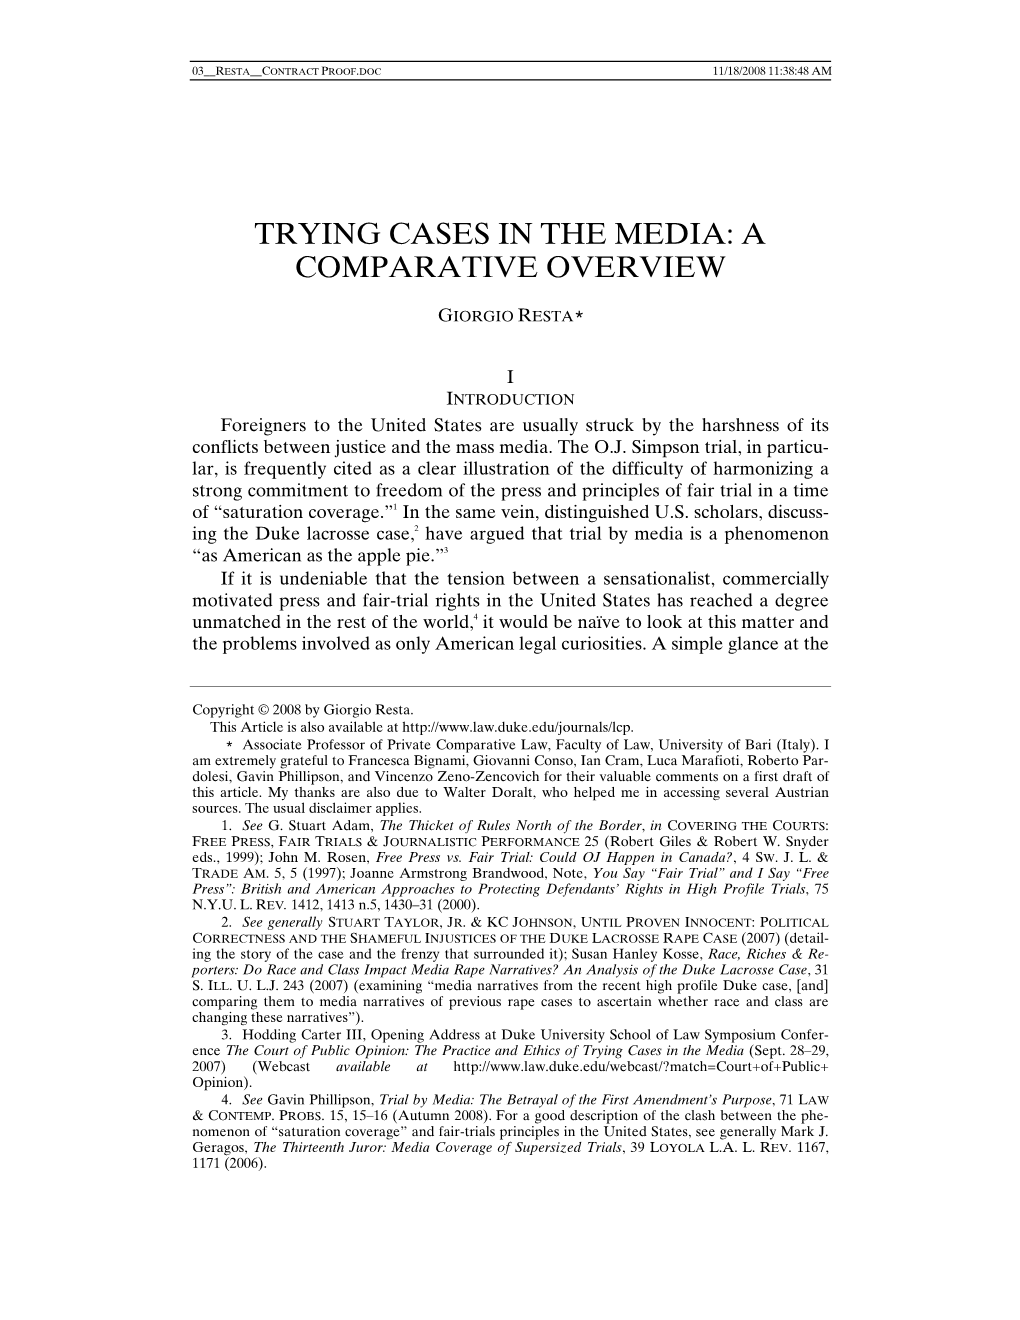 Trying Cases in the Media: a Comparative Overview